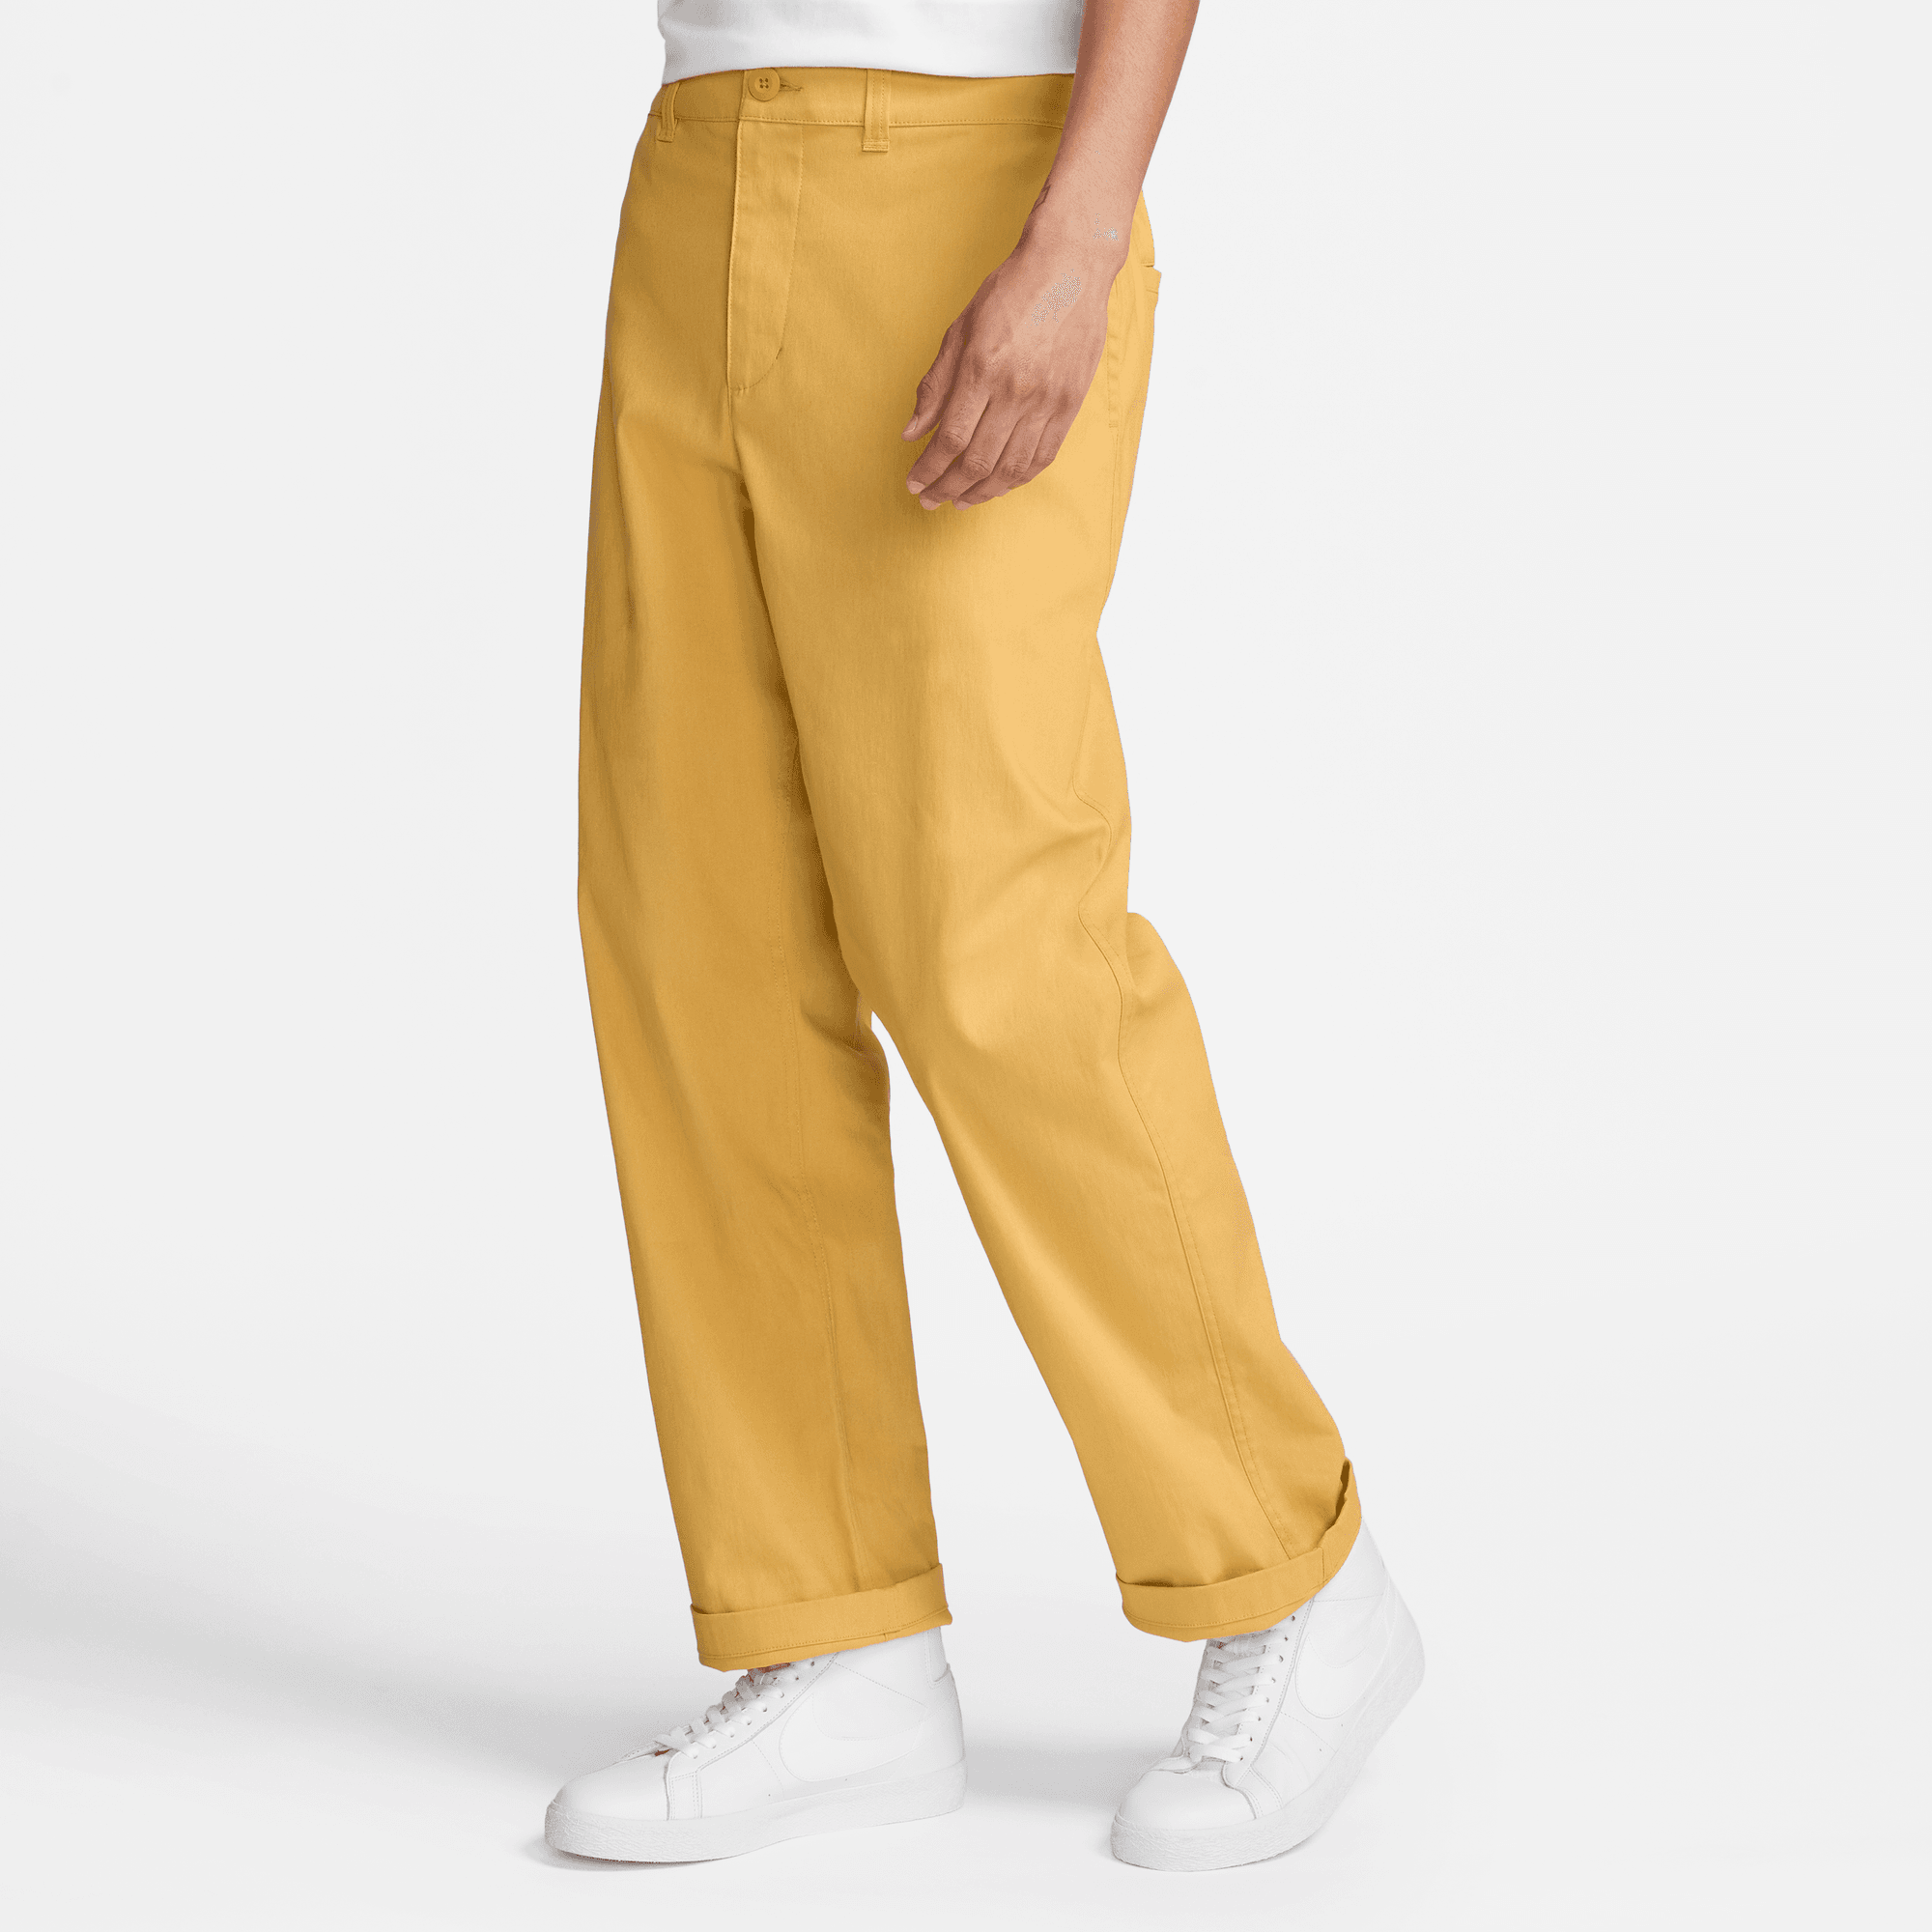 Nike SB Loose-Fit Skate Chino Pants Sanded Gold